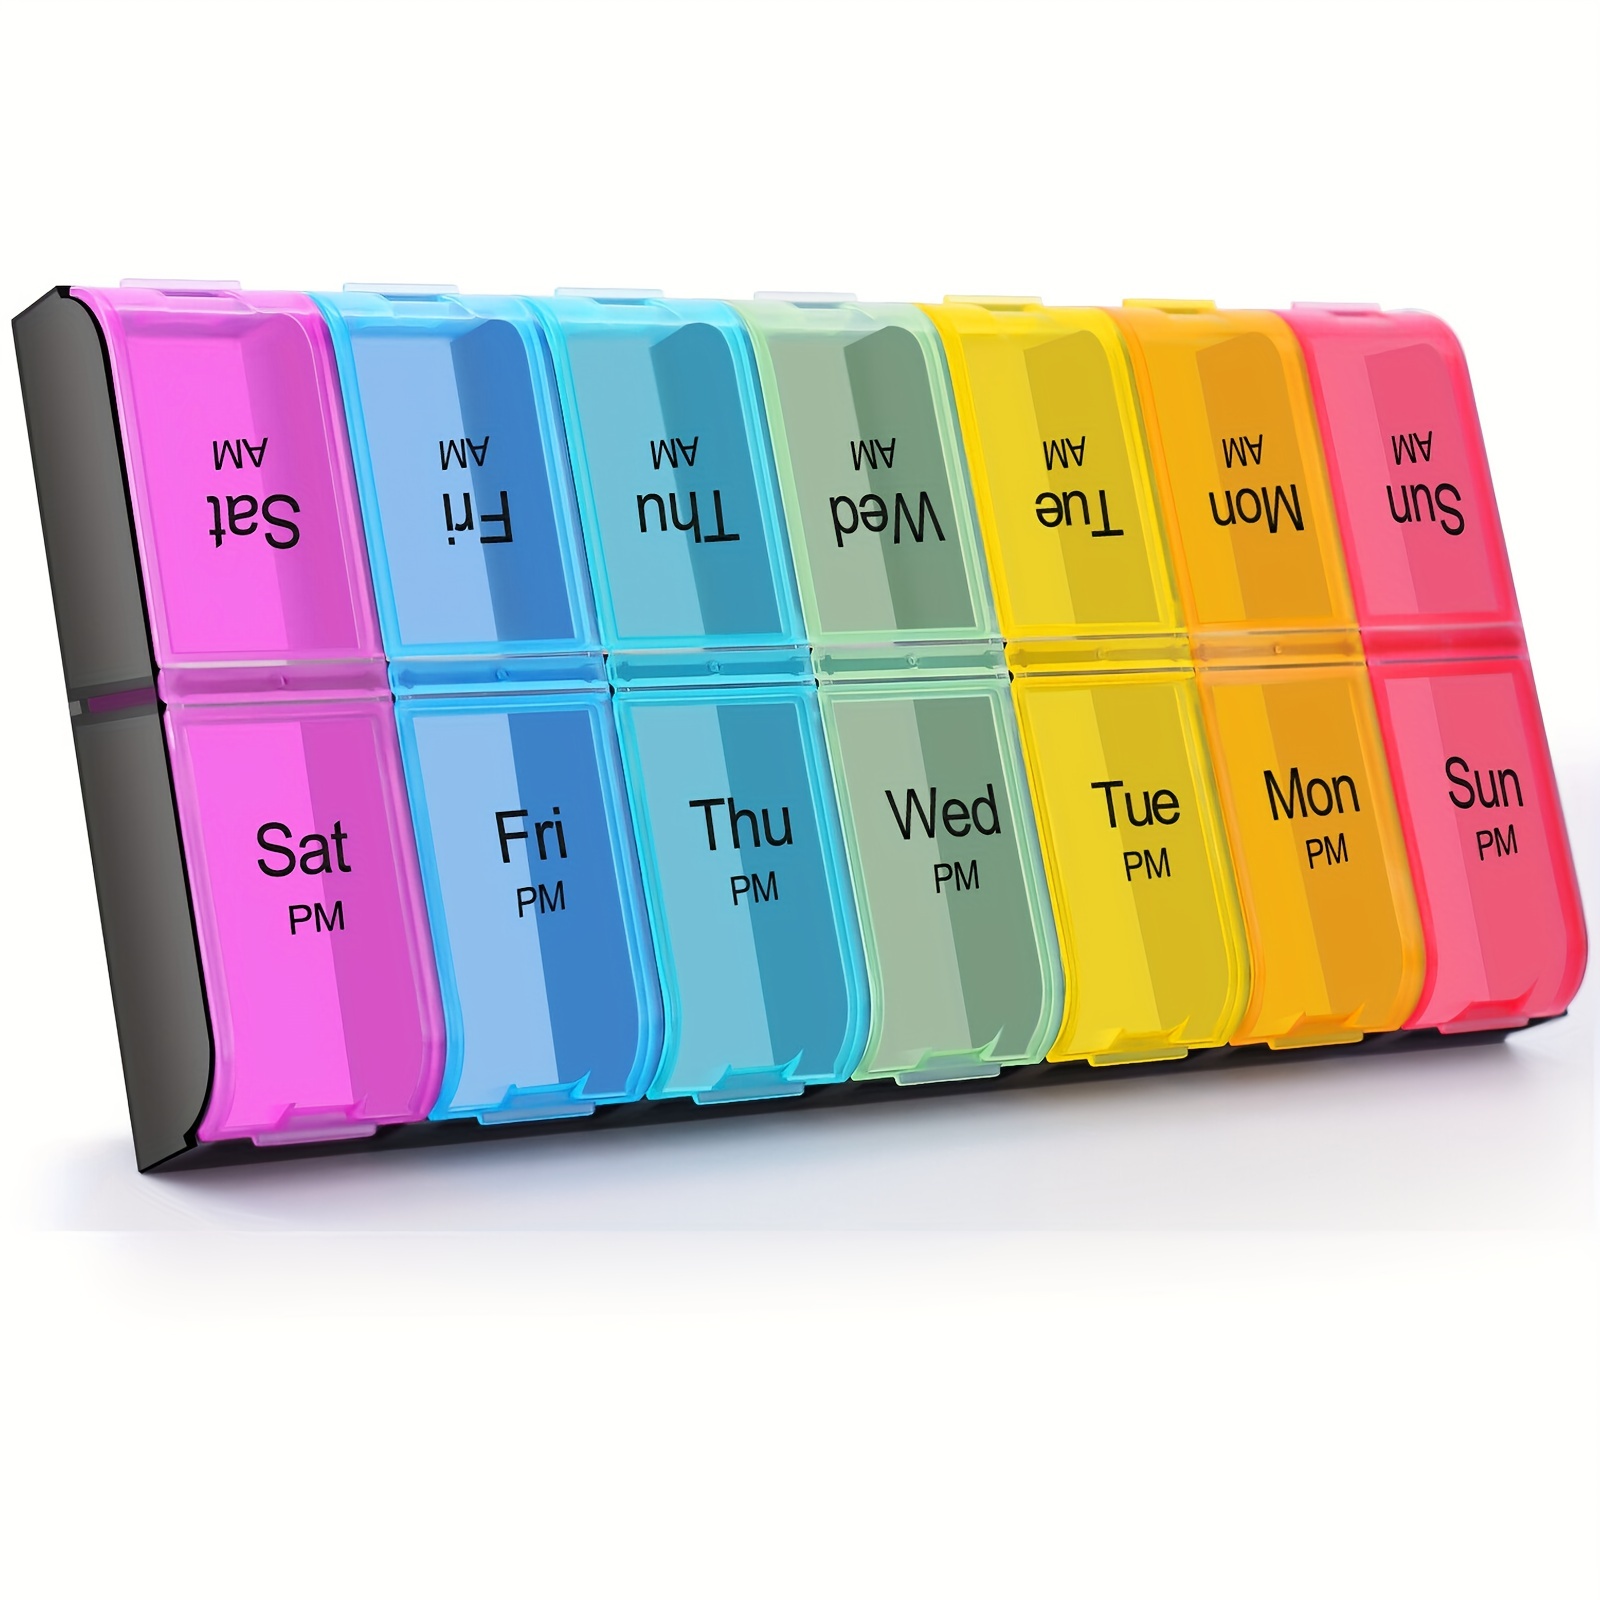 BUG HULL Pill Organizer 2 Times a Day, Extra Large AM PM Pill Box